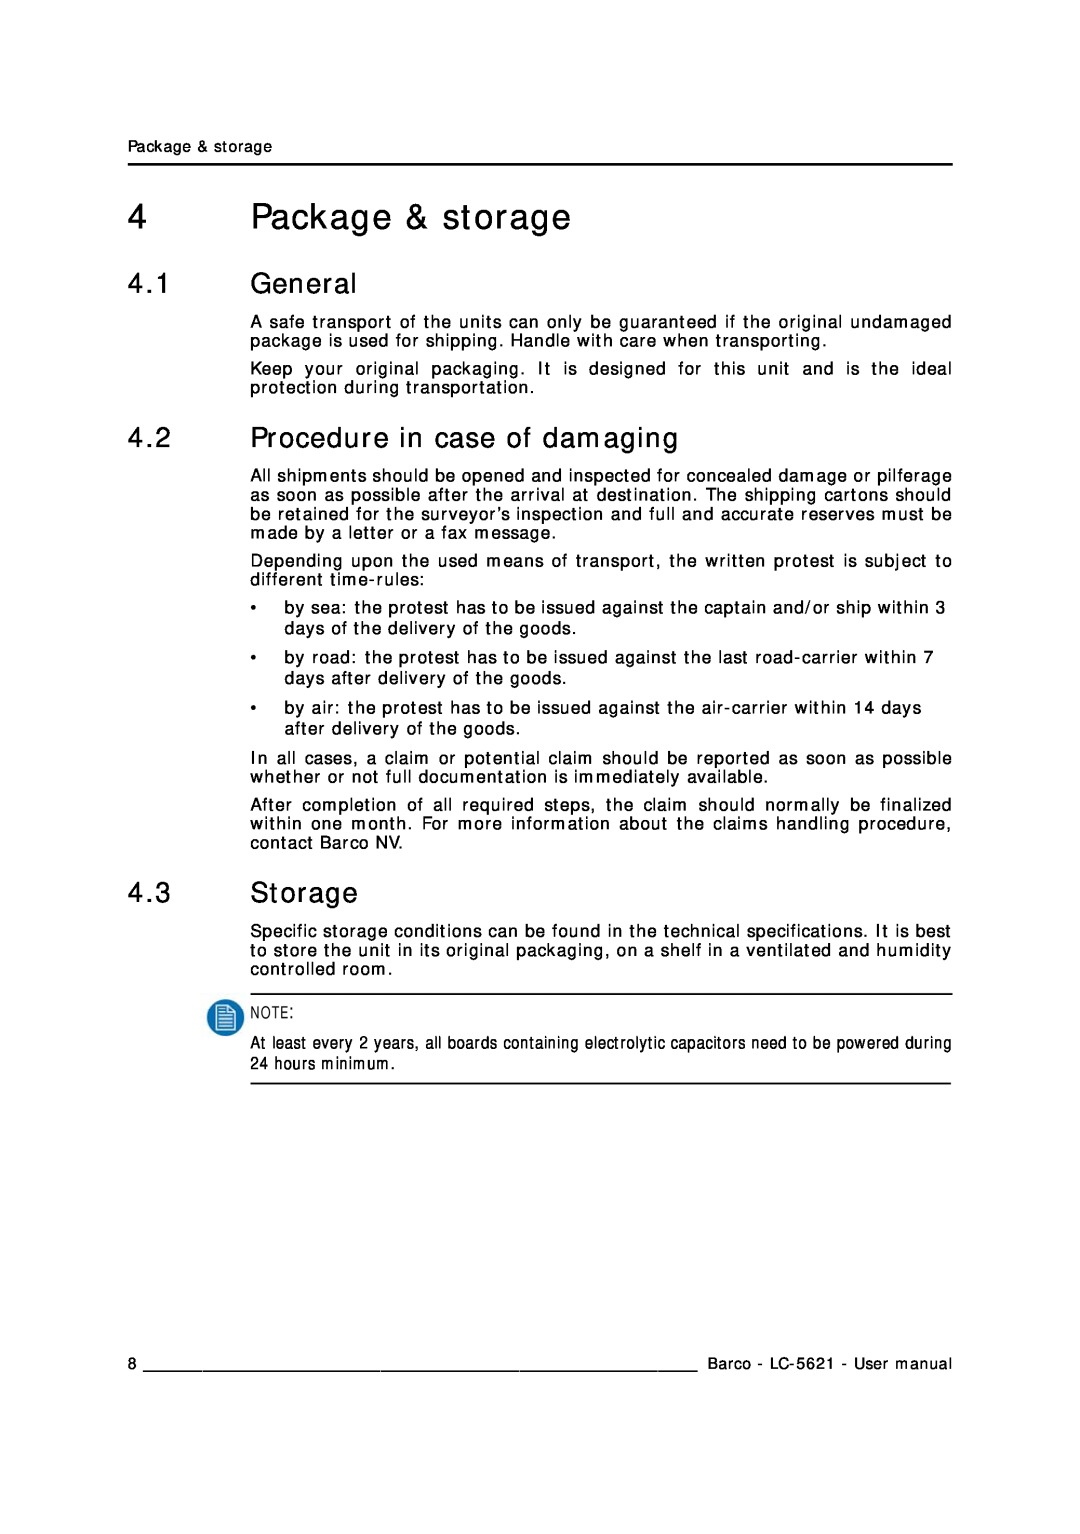 Barco LC-5621 user manual Package & storage, General, Procedure in case of damaging, Storage 